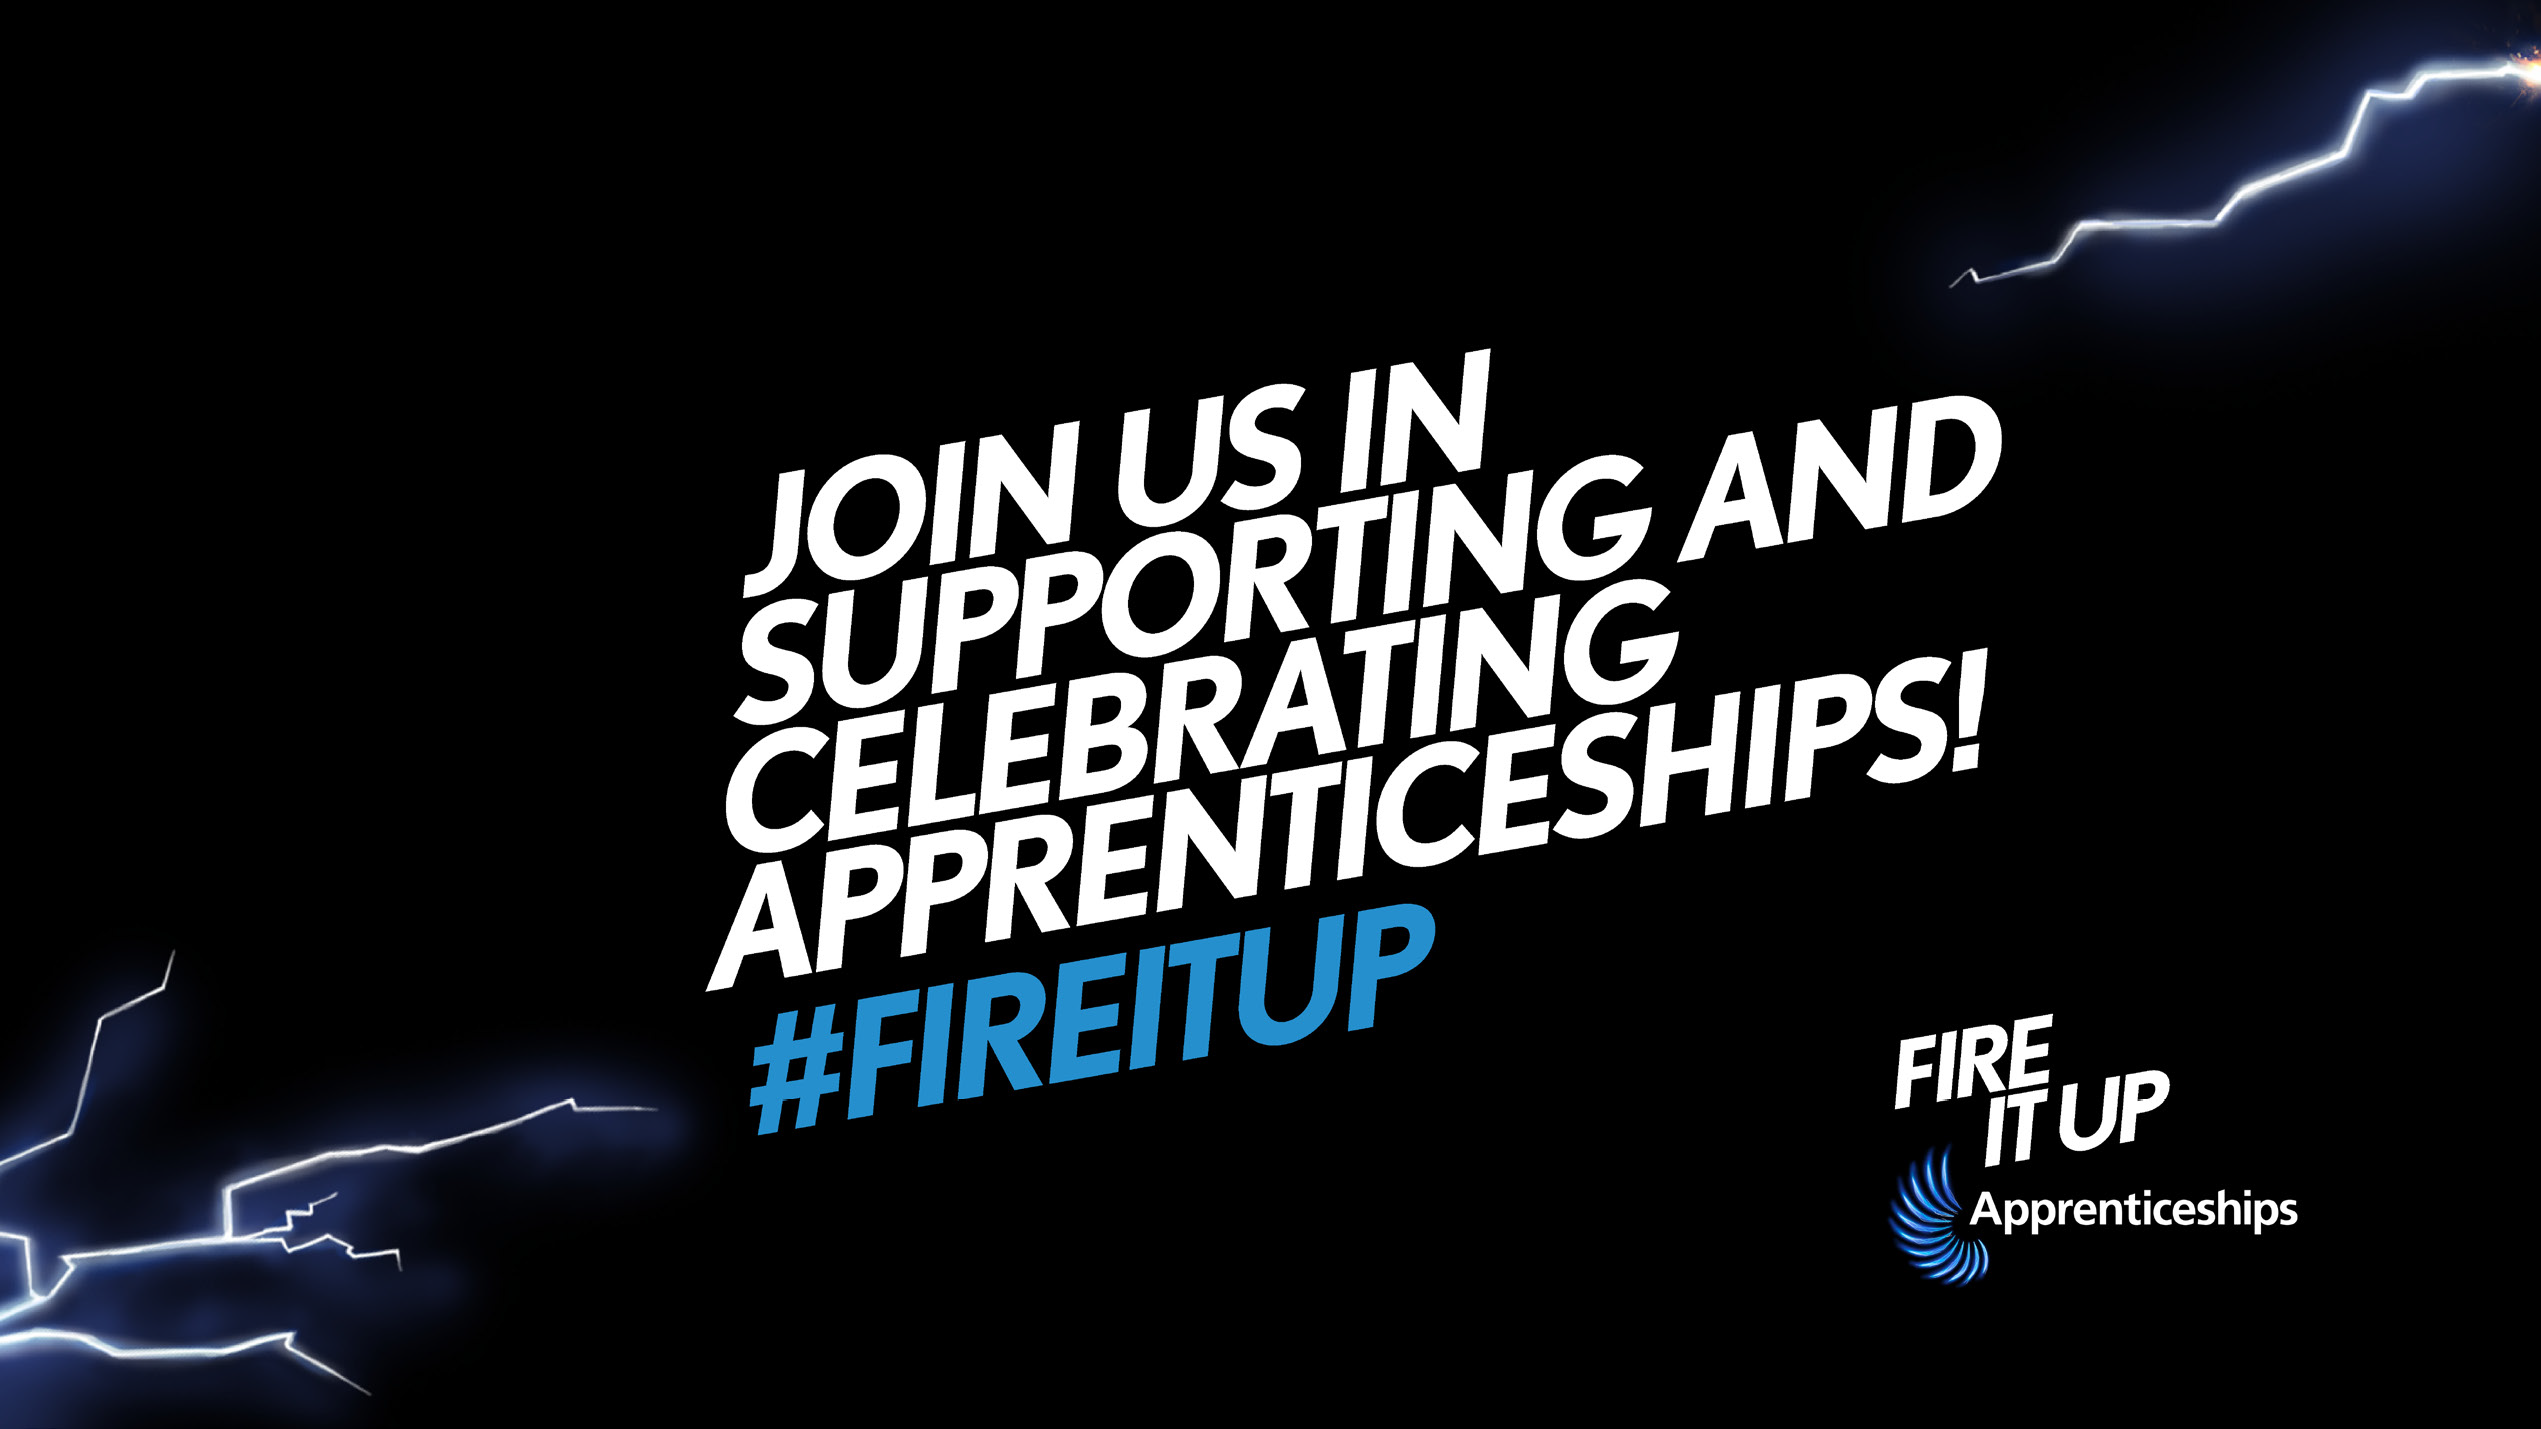 ‘Fire it Up’ Apprenticeships Campaign Launched Today